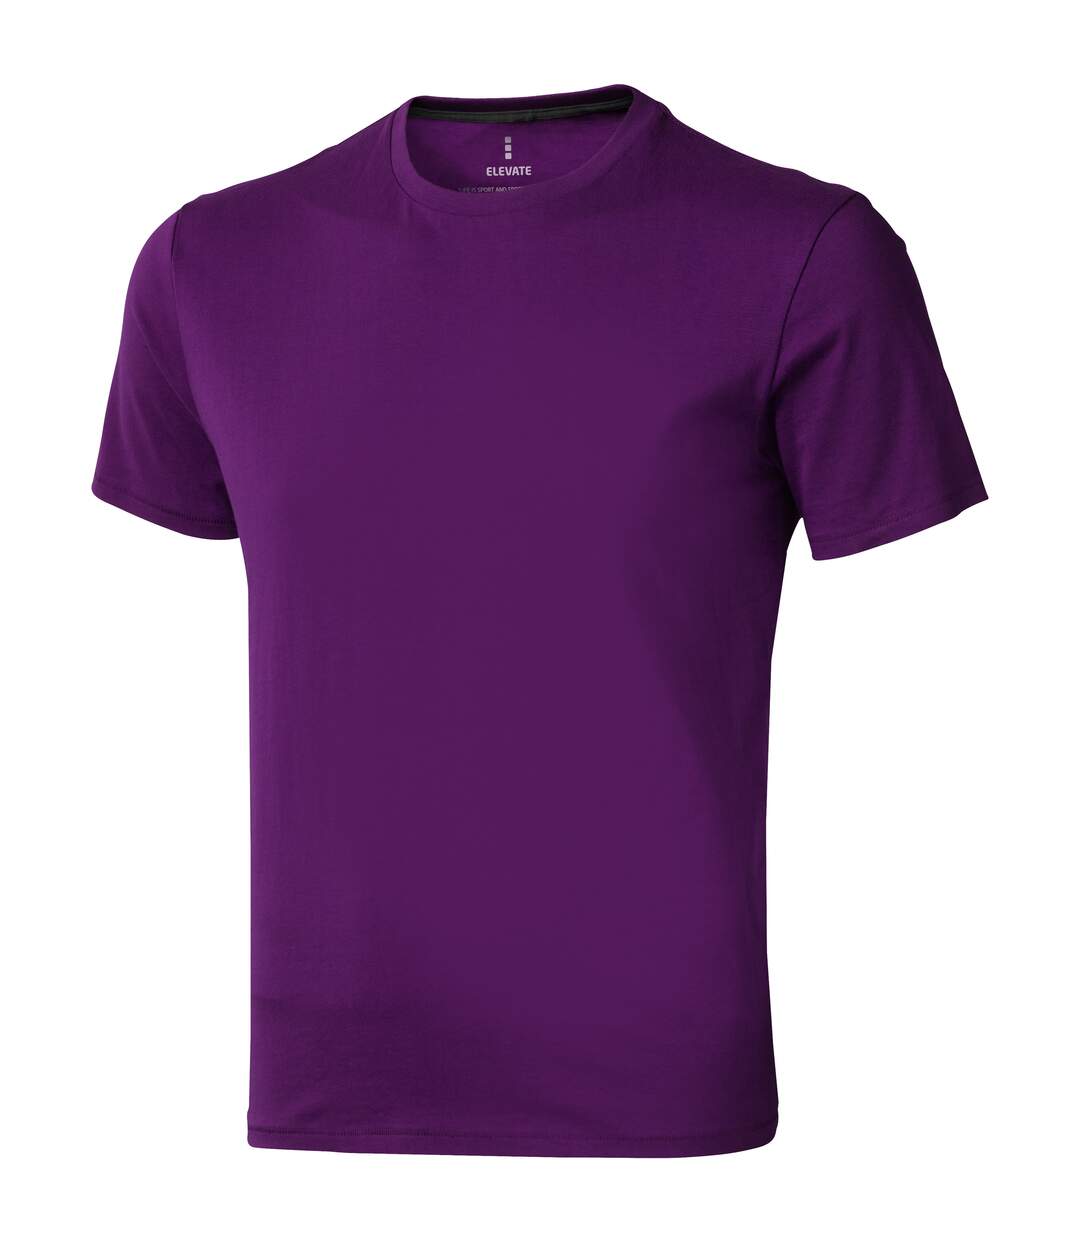 Elevate - T-shirt manches courtes Nanaimo - Homme (Prune) - UTPF1807